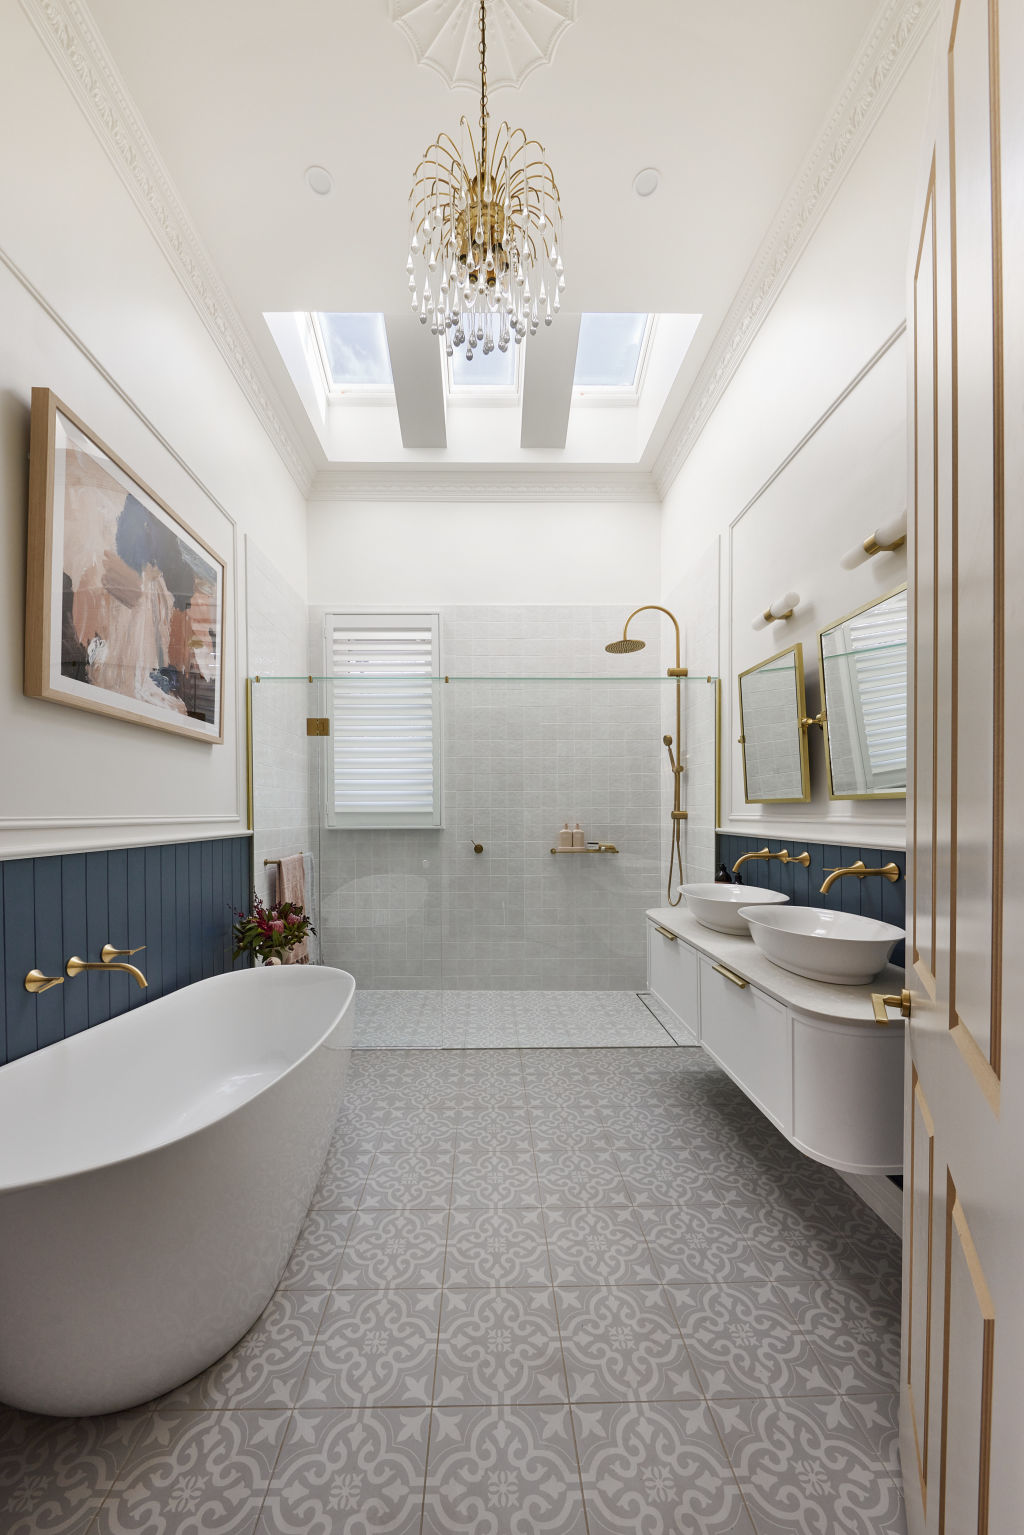 Tom and Sarah-Jane's bathroom chandelier is a show-stopper. Photo: Nine